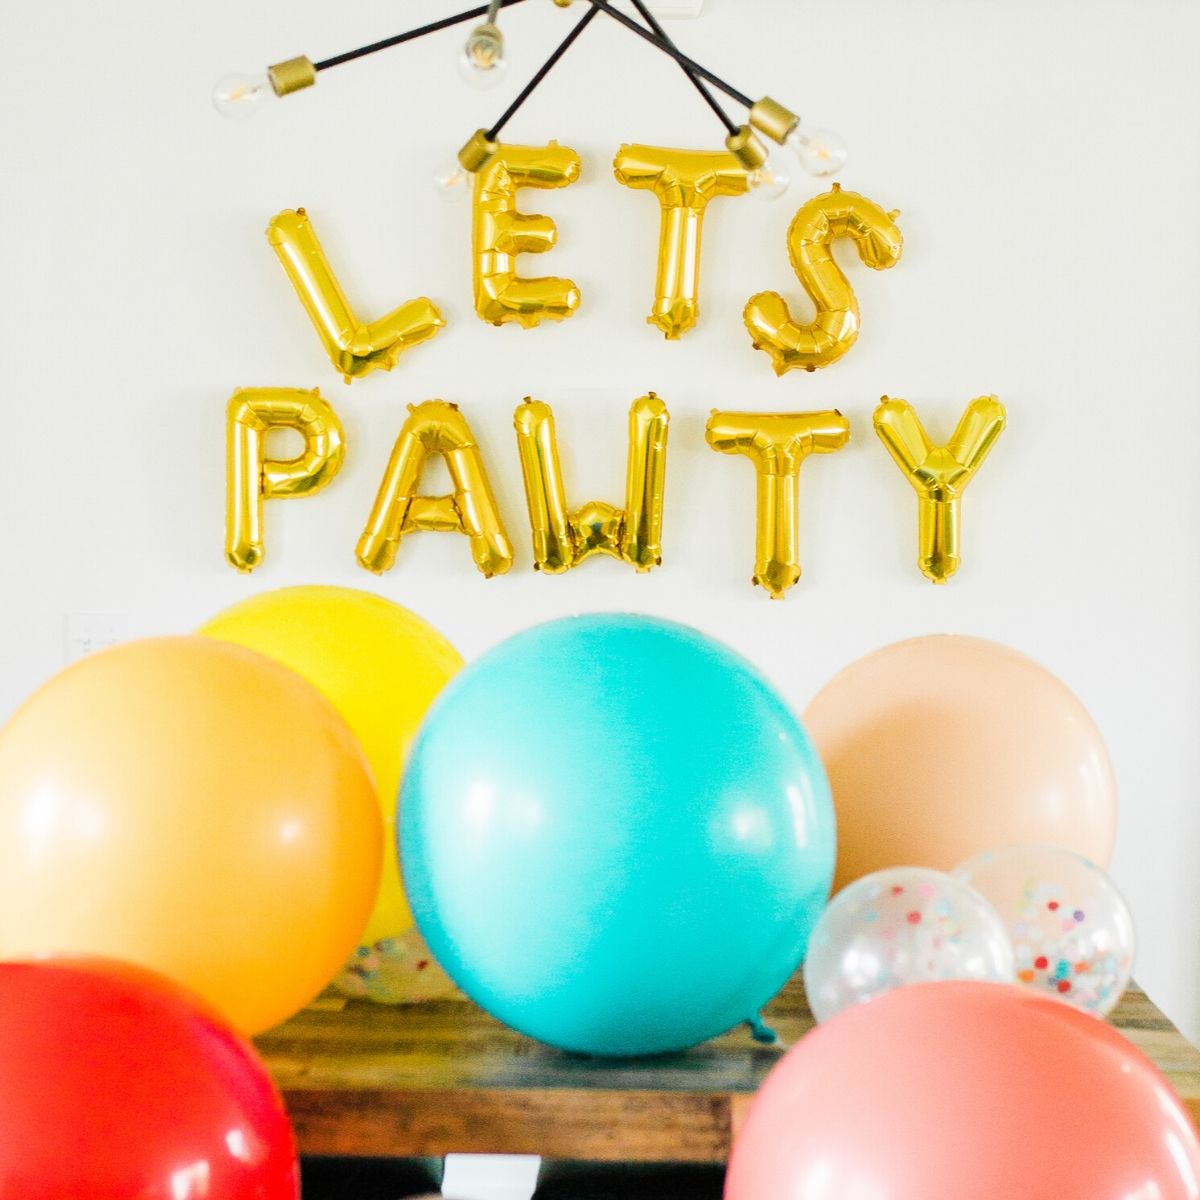 How To Plan Your Dog's Birthday Party or Gotcha Day by Dog Threads